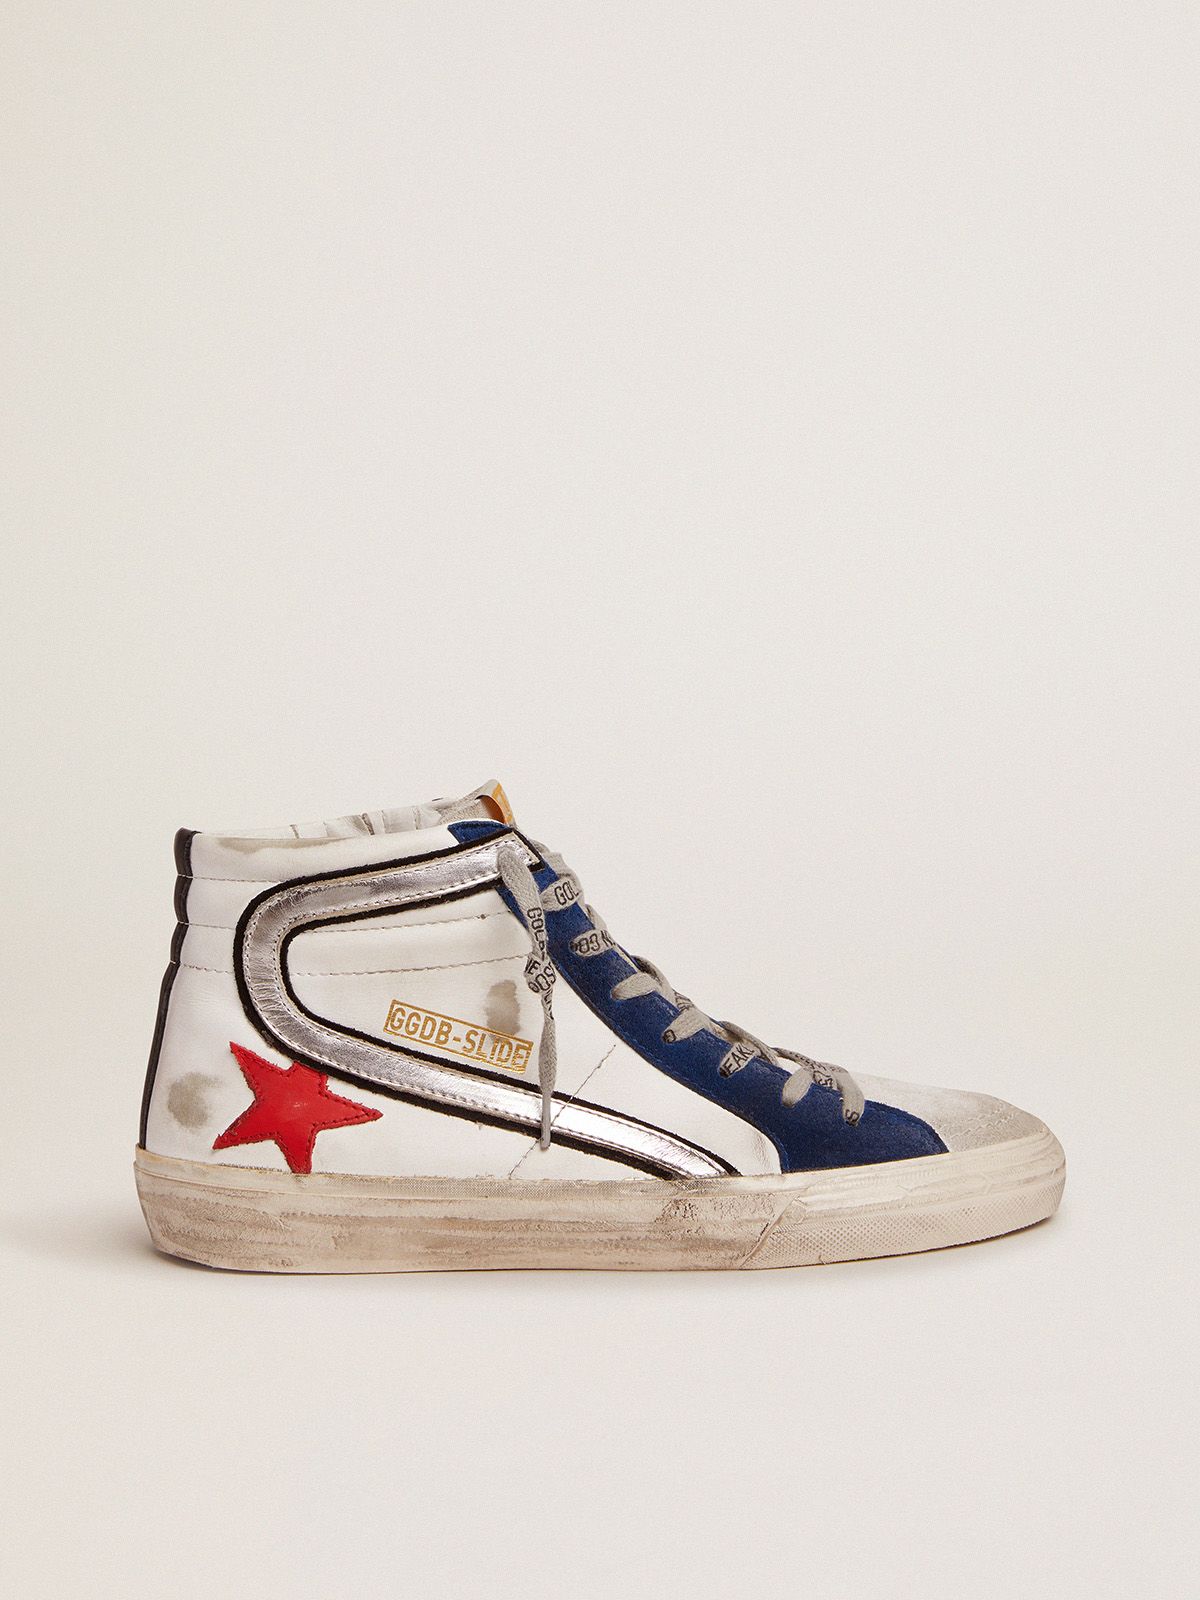 golden goose in leather with Slide red white sneakers star